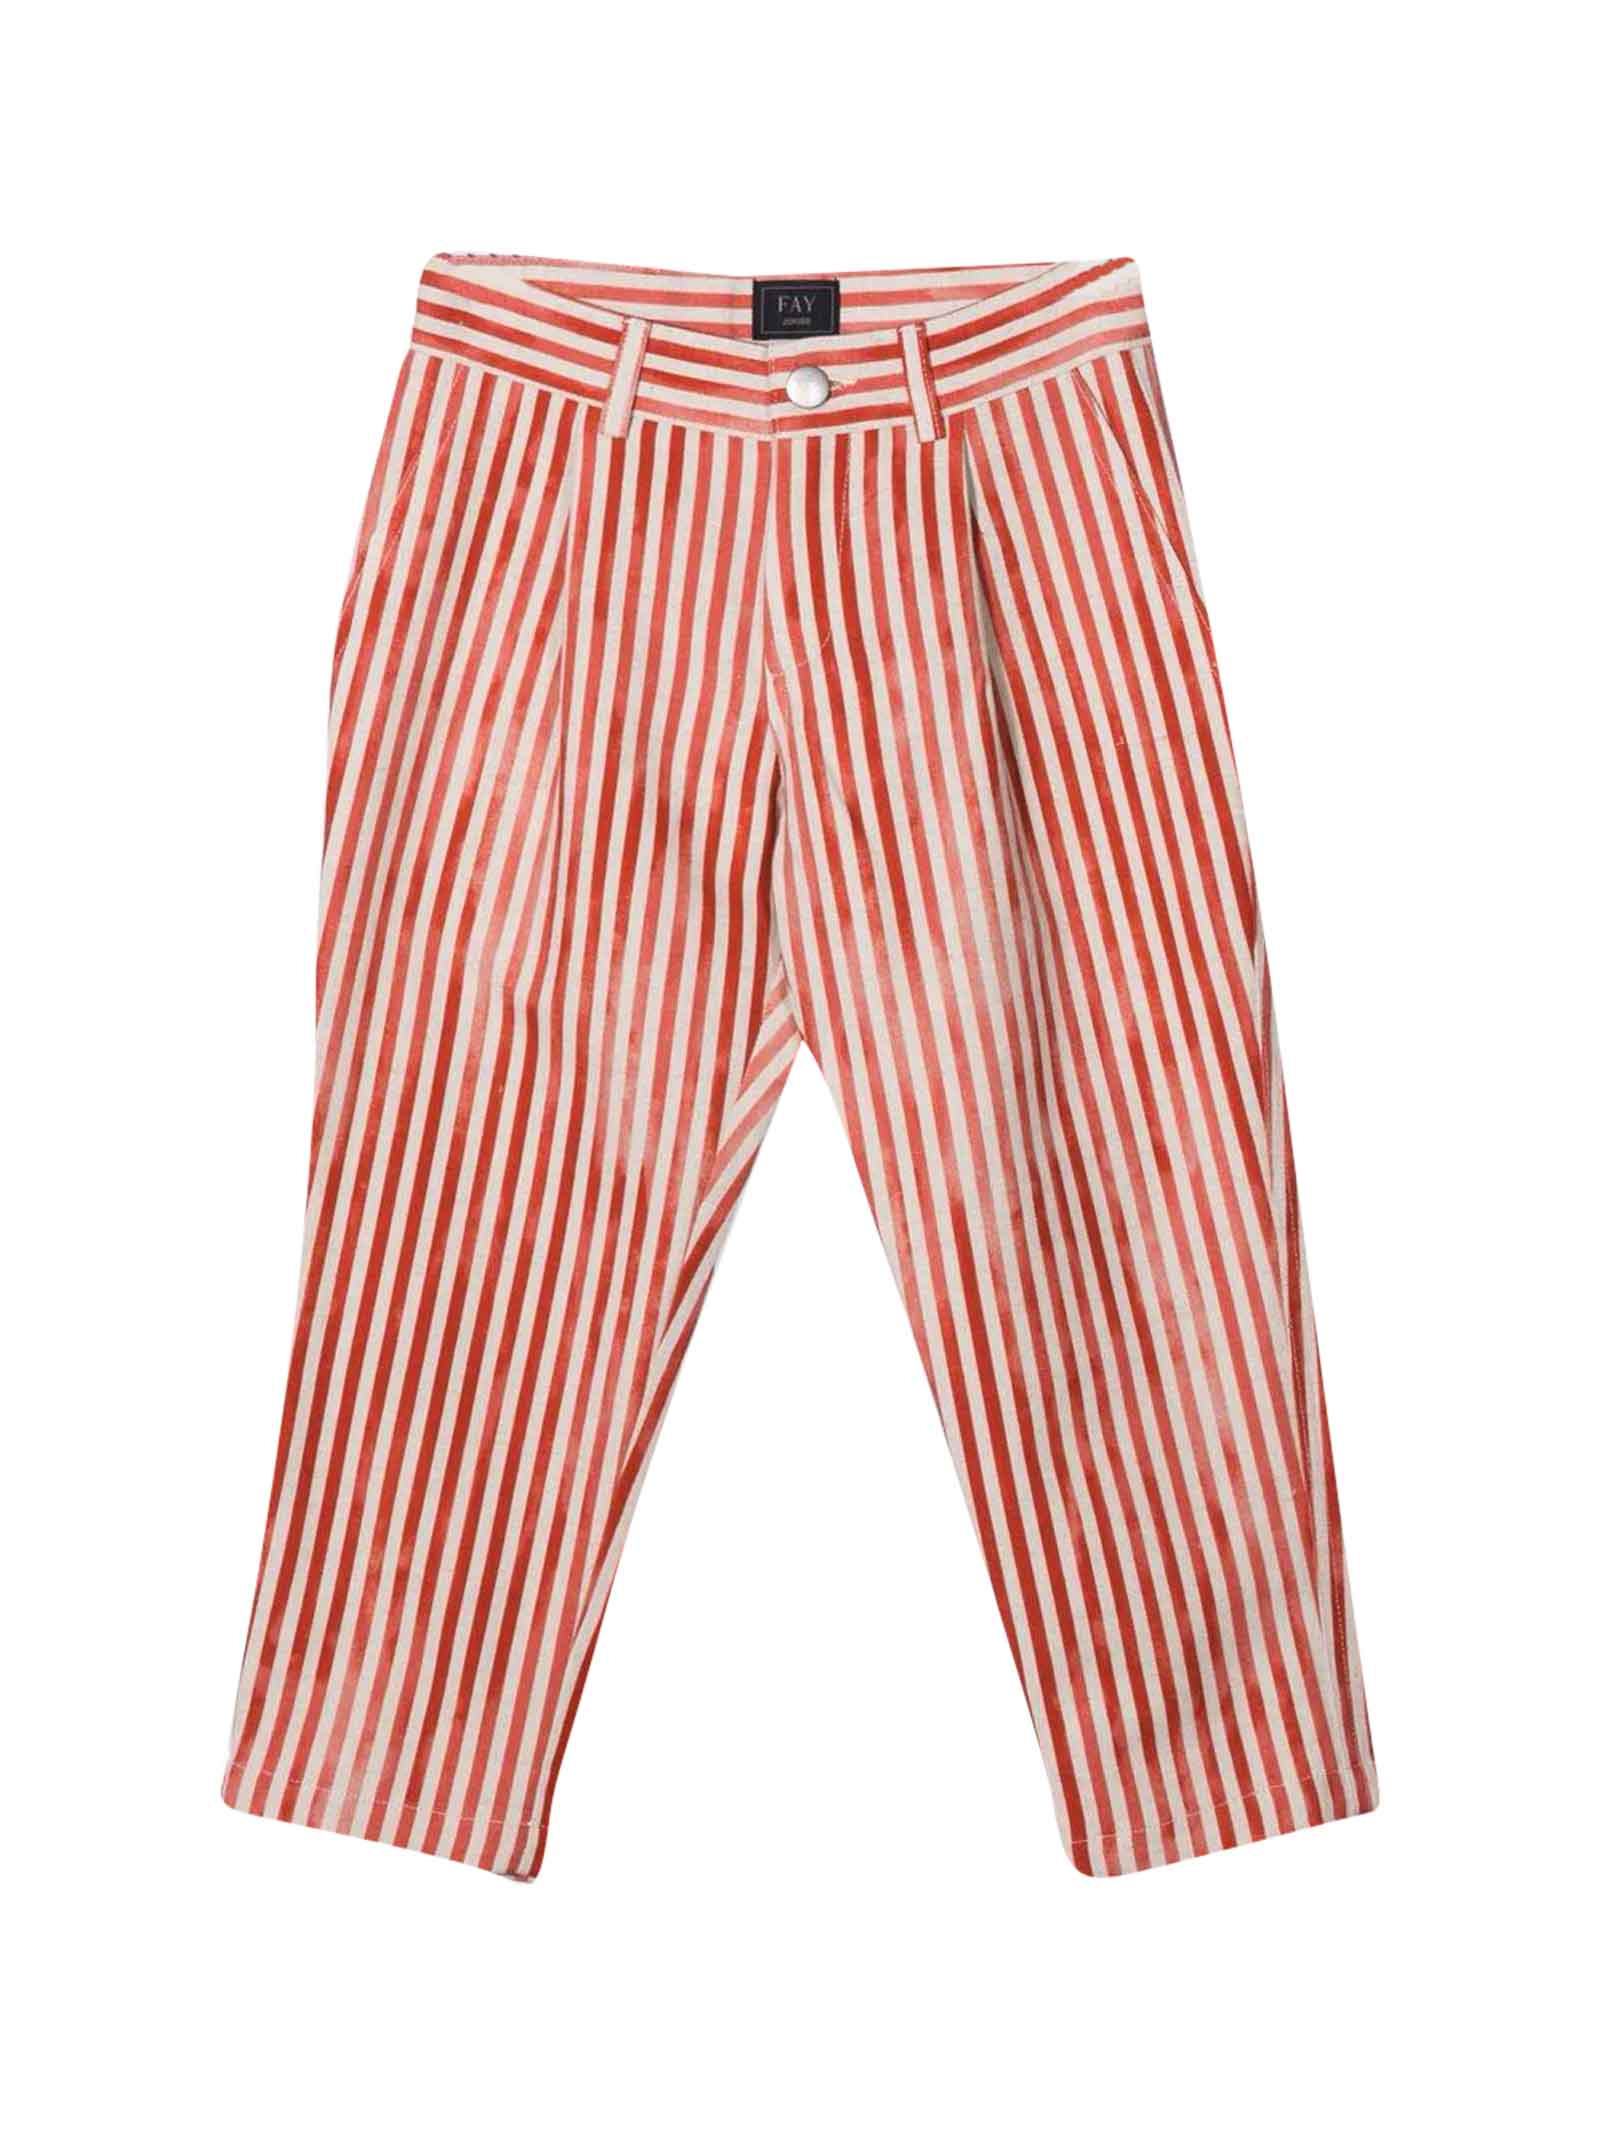 Mid Rise Extra Stretch Red and White Striped Trousers